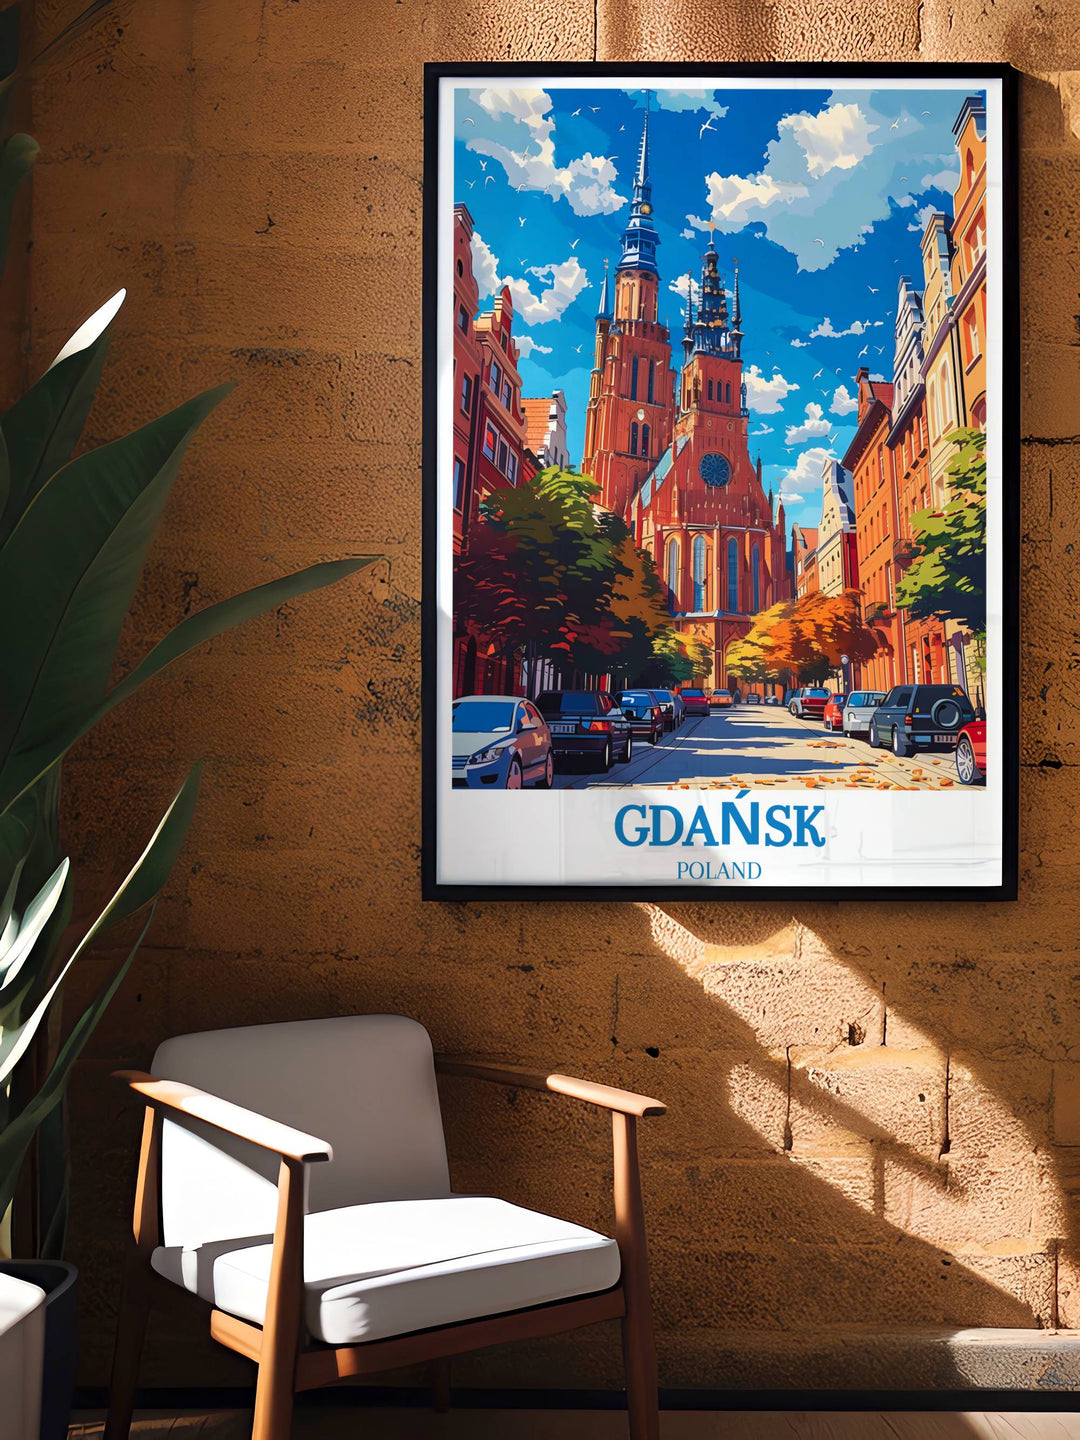 A breathtaking Gdańsk Photo Print that offers a window to the soul of Gdańsk, beautifully capturing its atmospheric ambiance and picturesque settings.